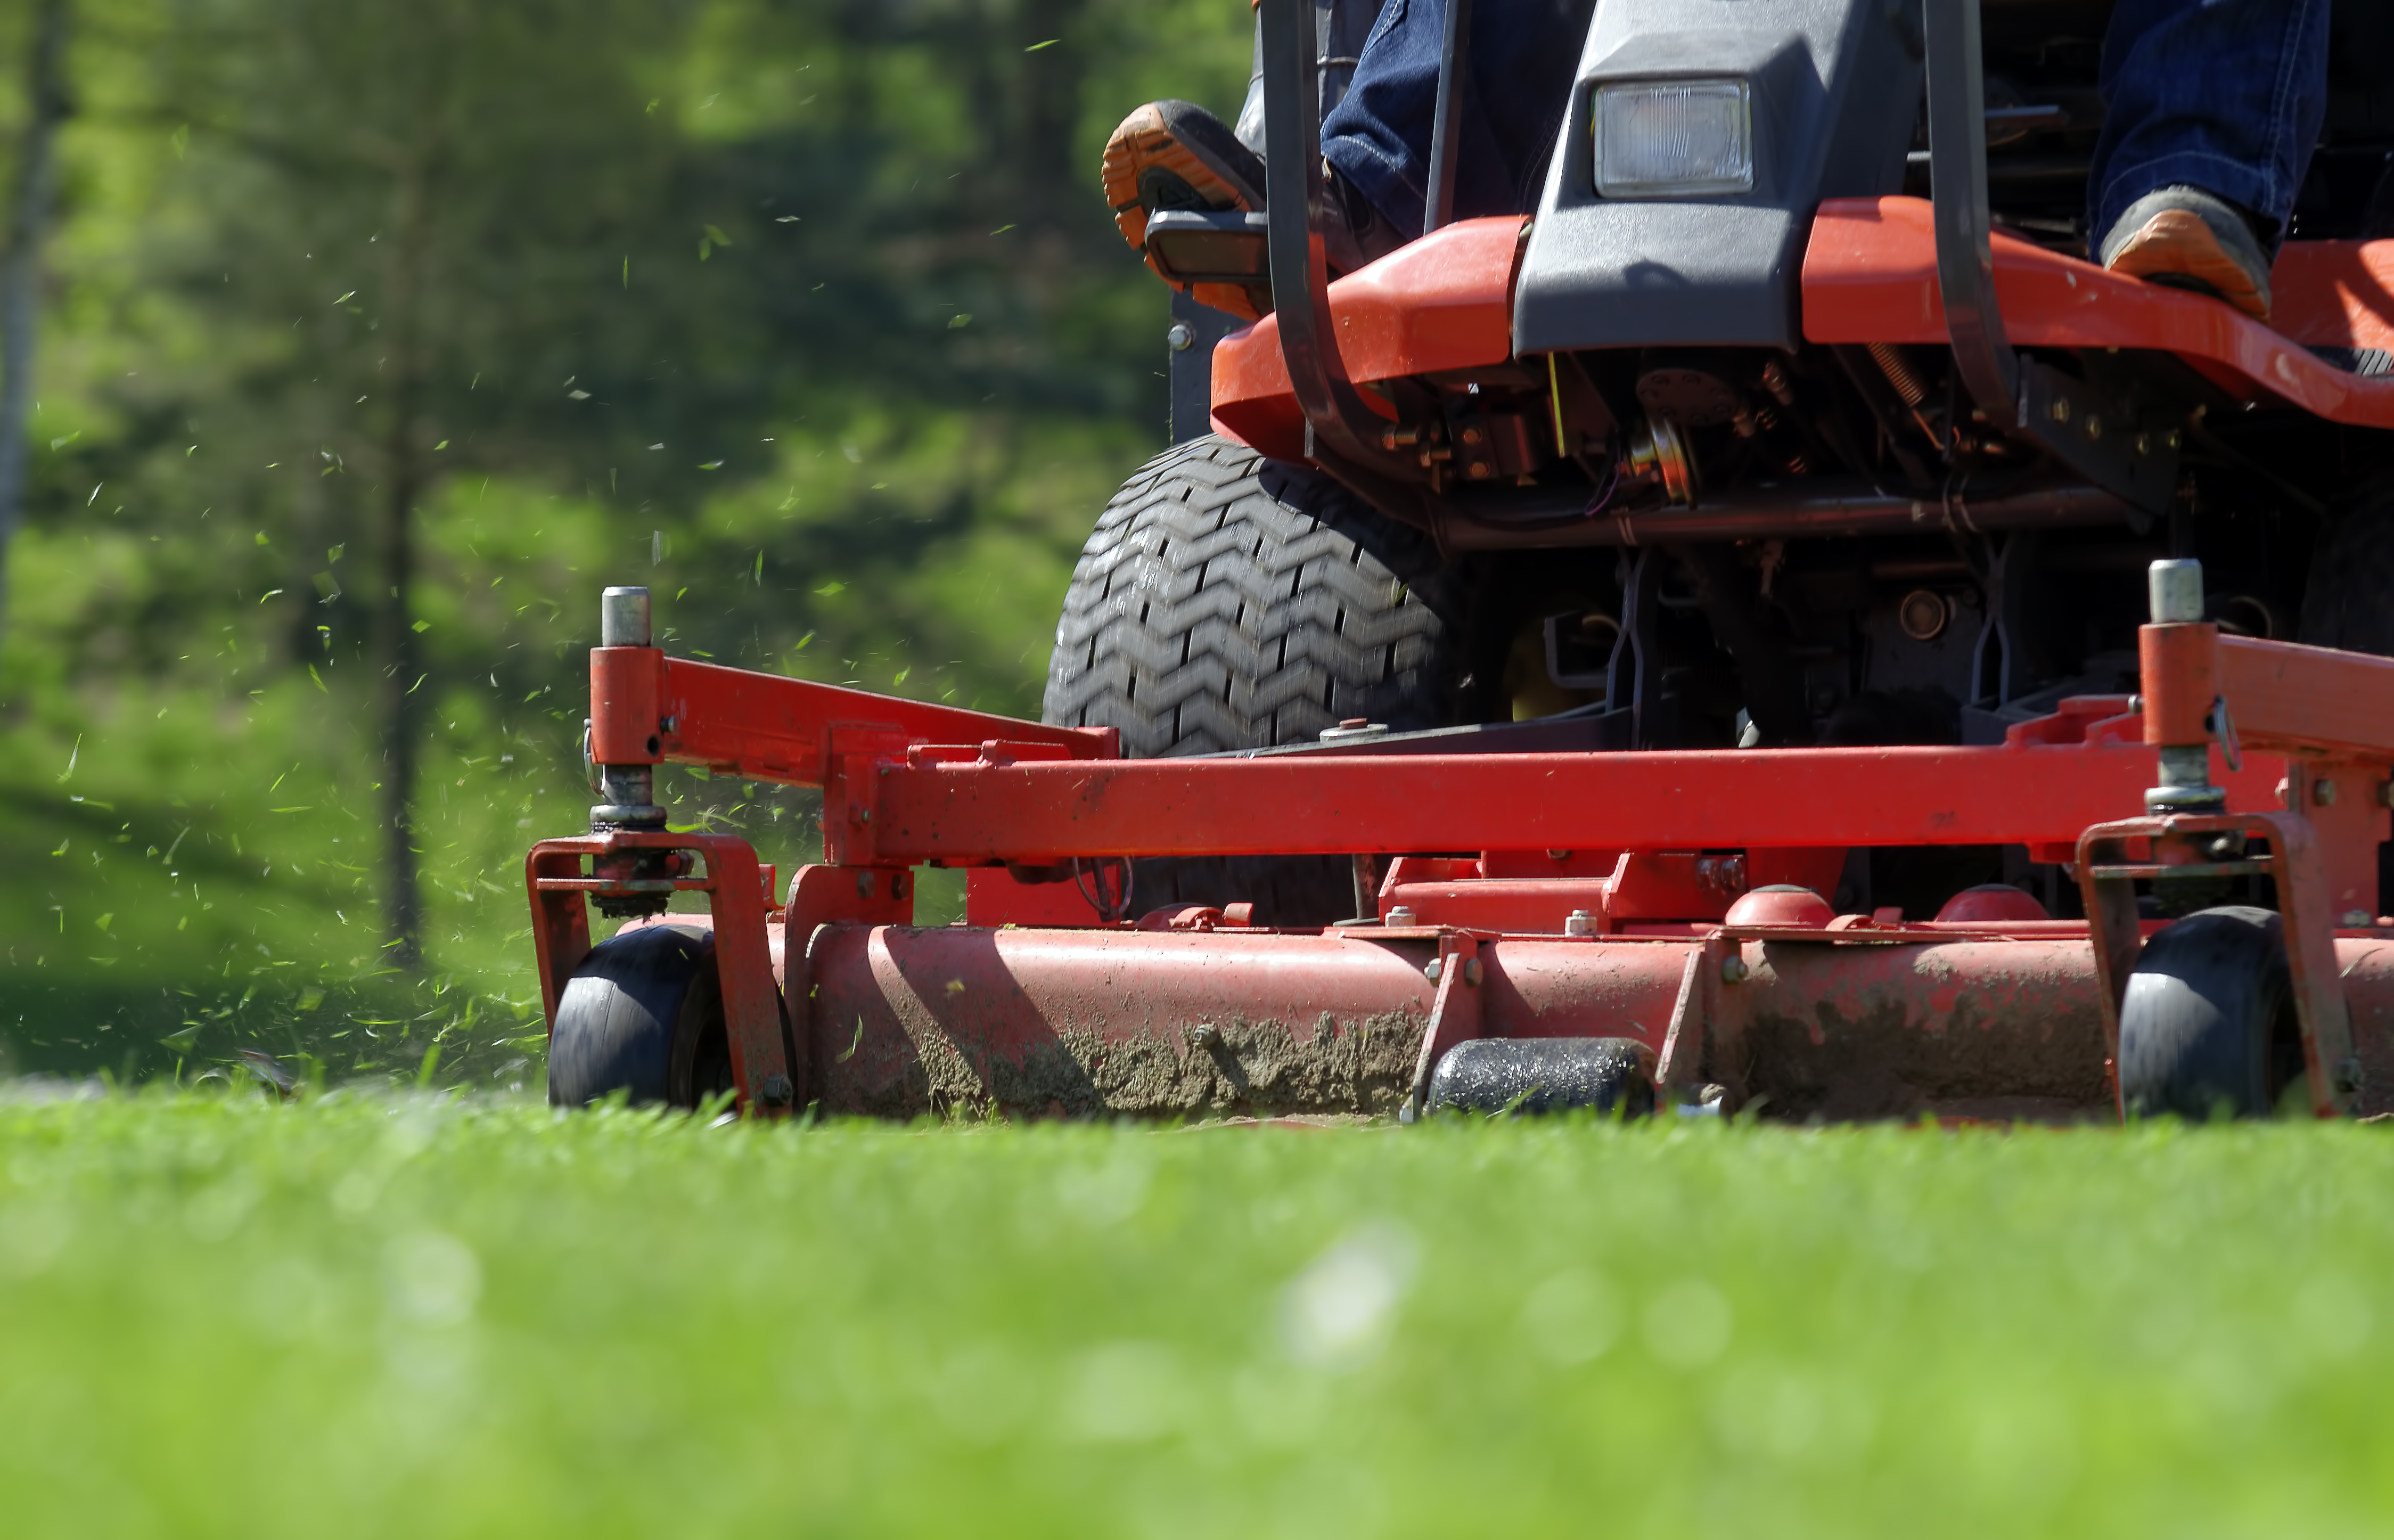 Anytime Lawn Care-Dothan's Choice for Lawn care & Landscaping